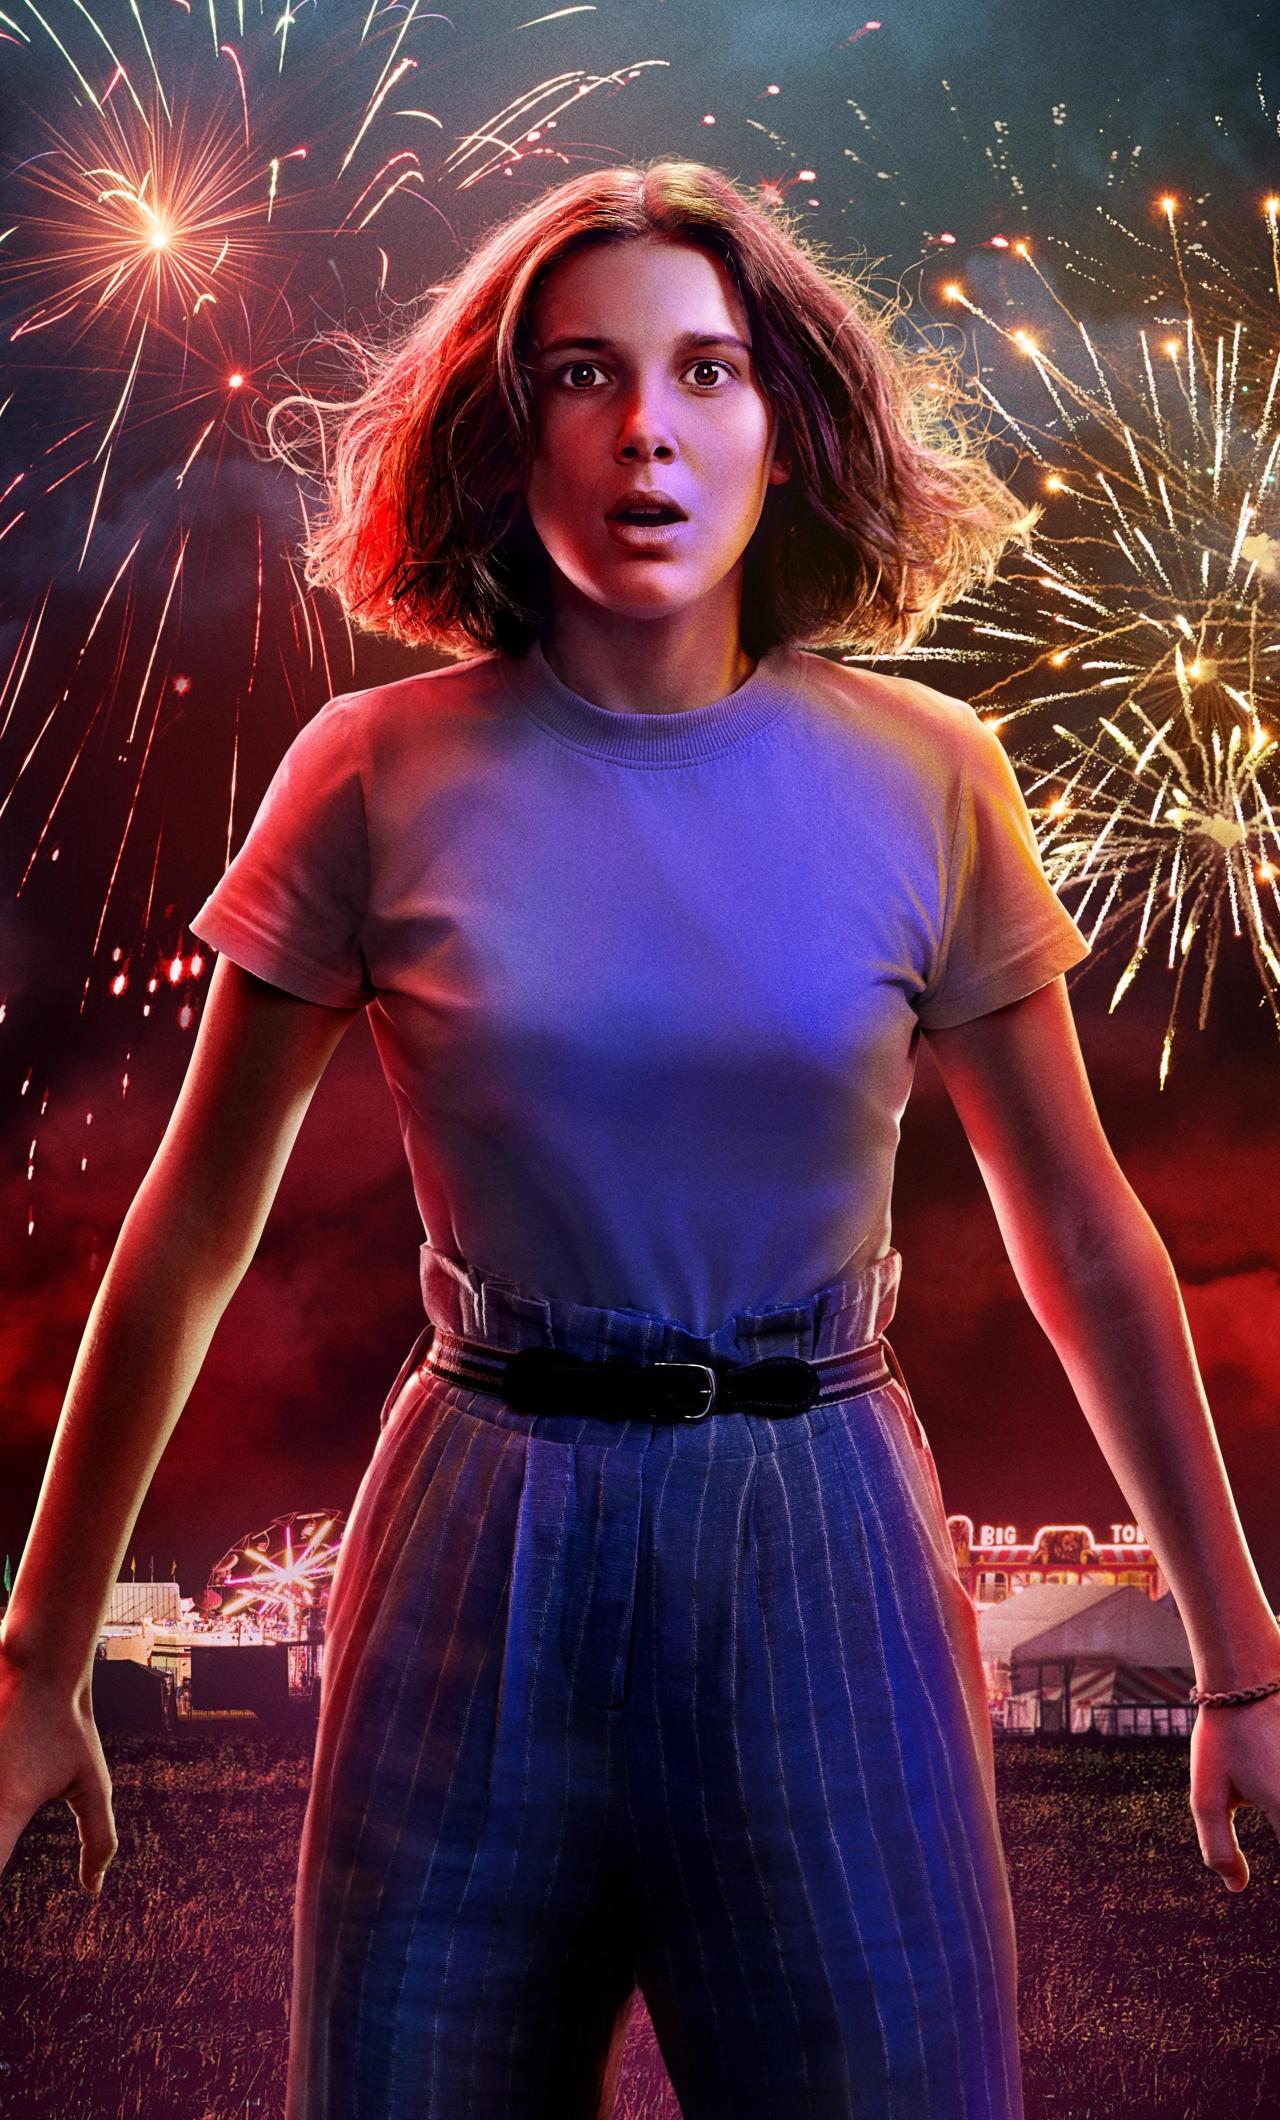 Millie Bobby Brown As Eleven Stranger Things 3